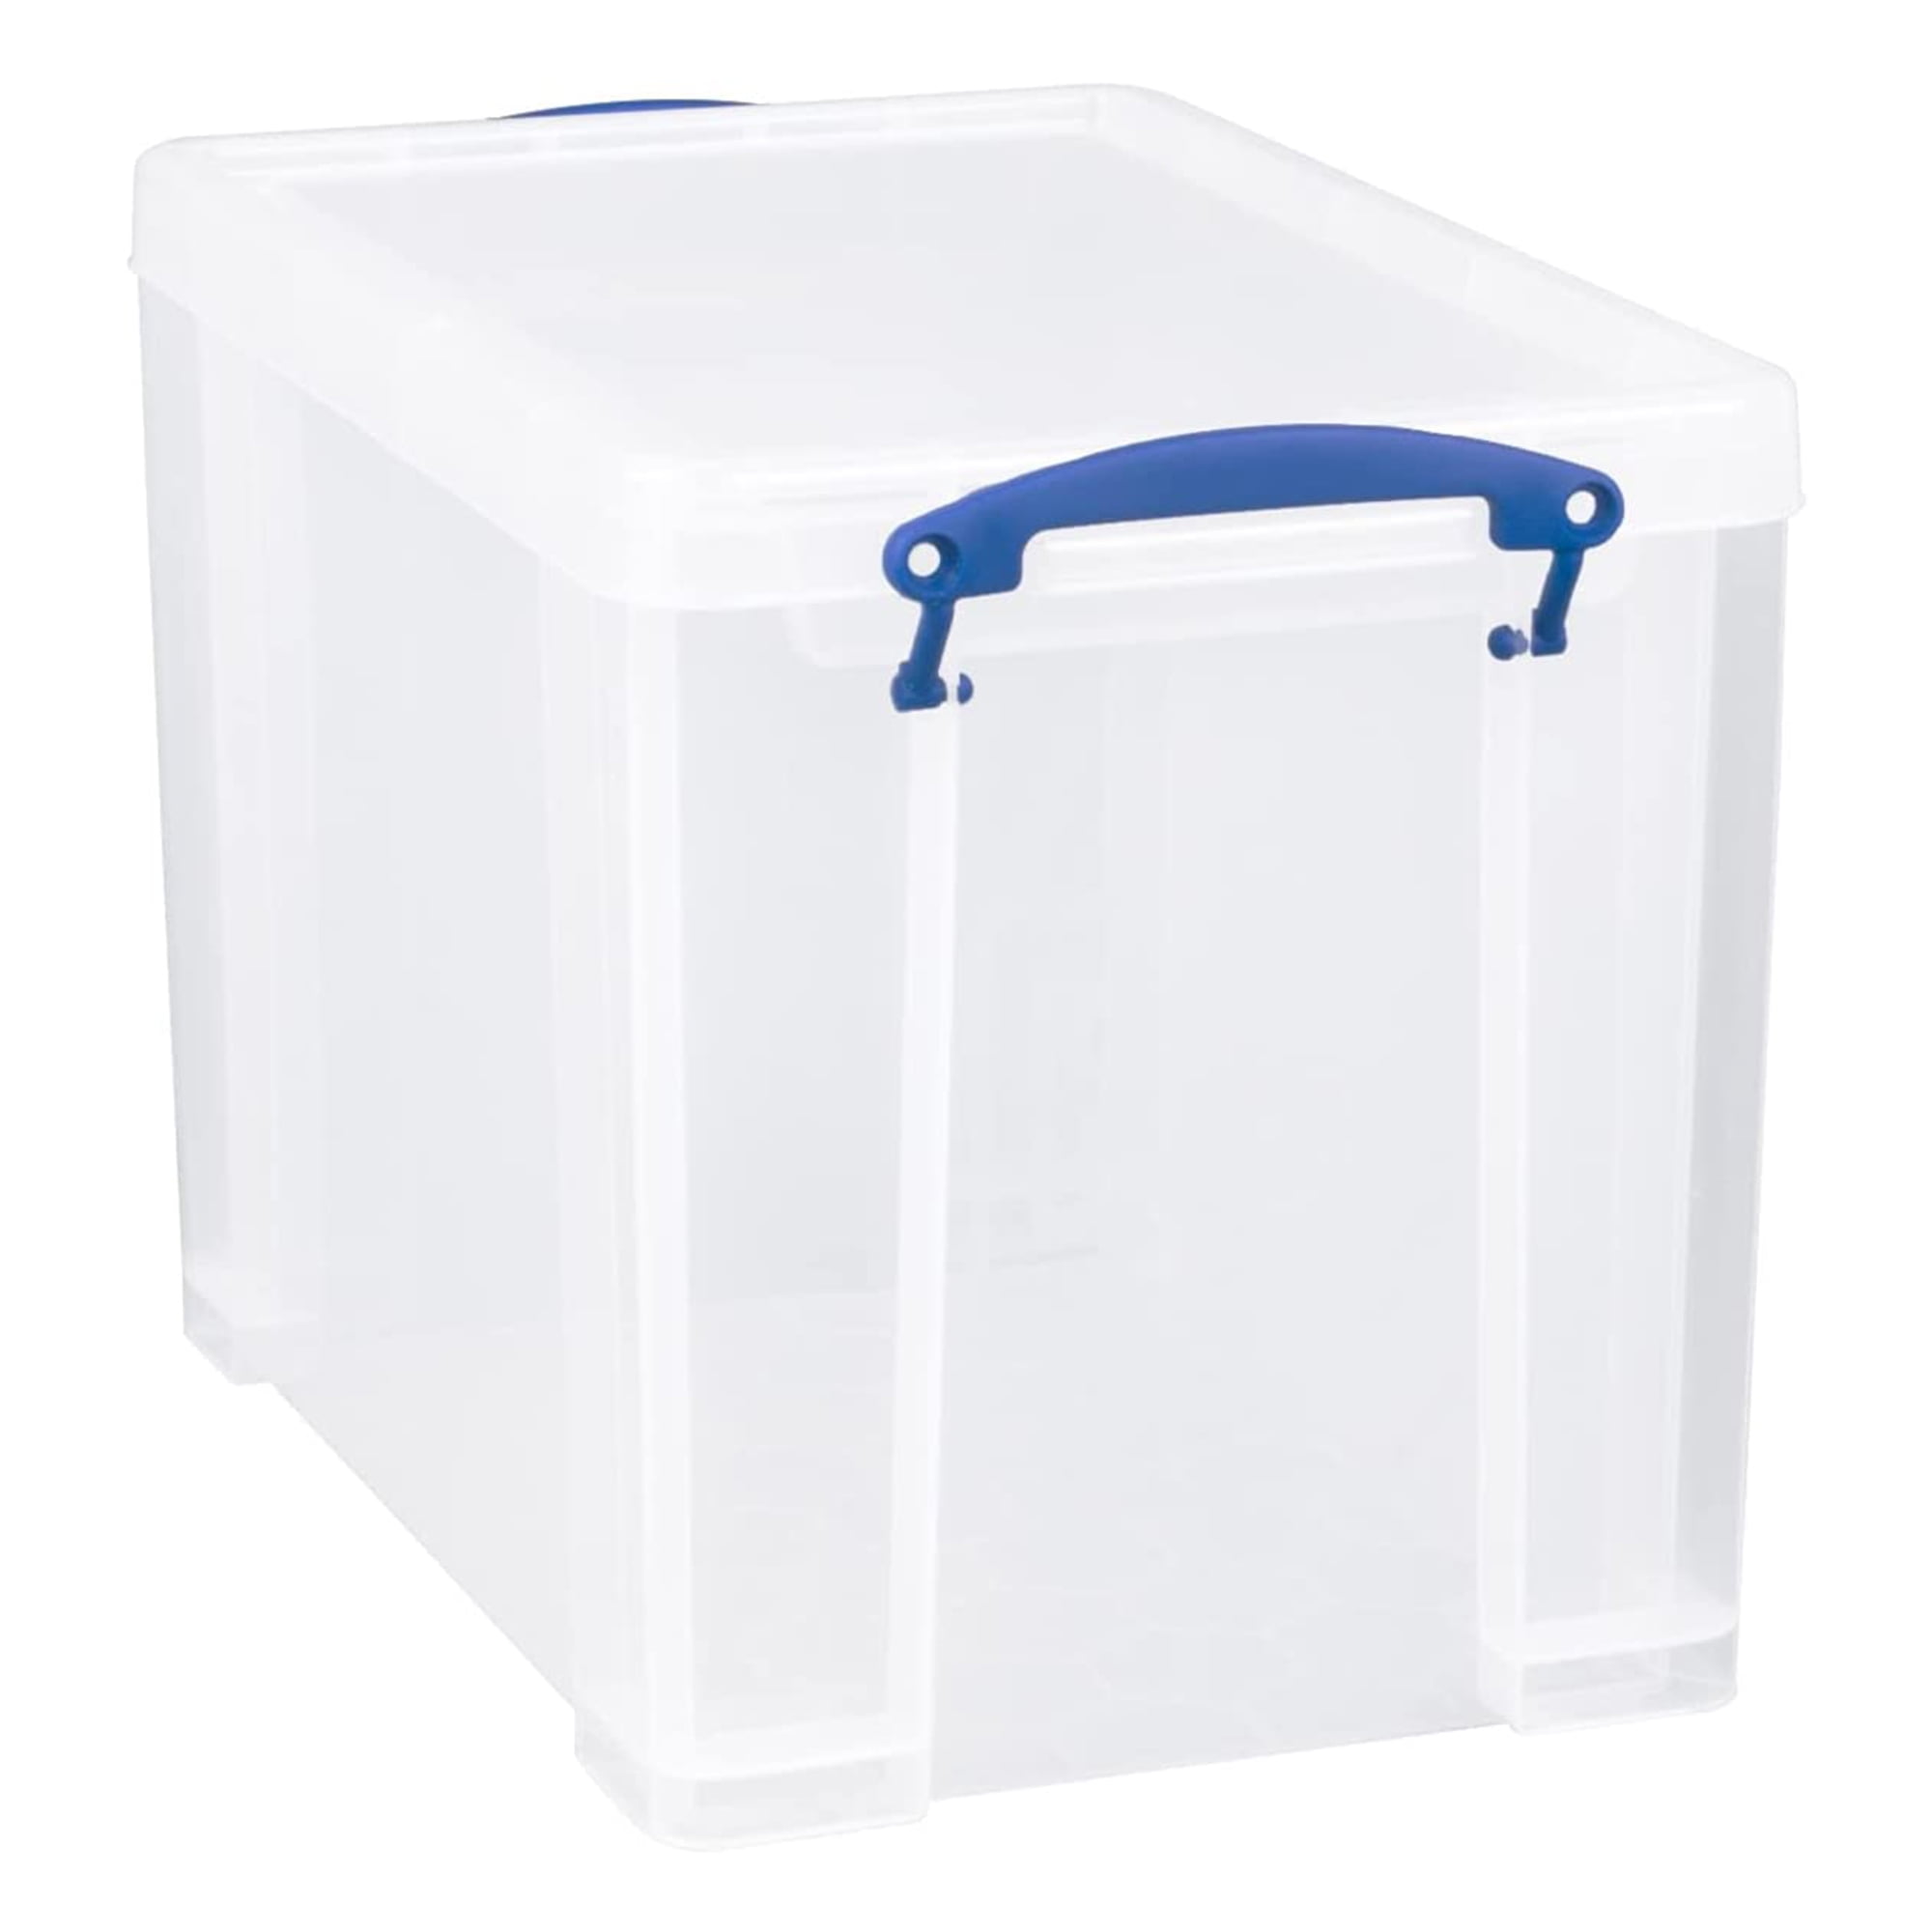 Arrow Home Products 04405 00044 1-Quart Freezer Containers, 3-Pack